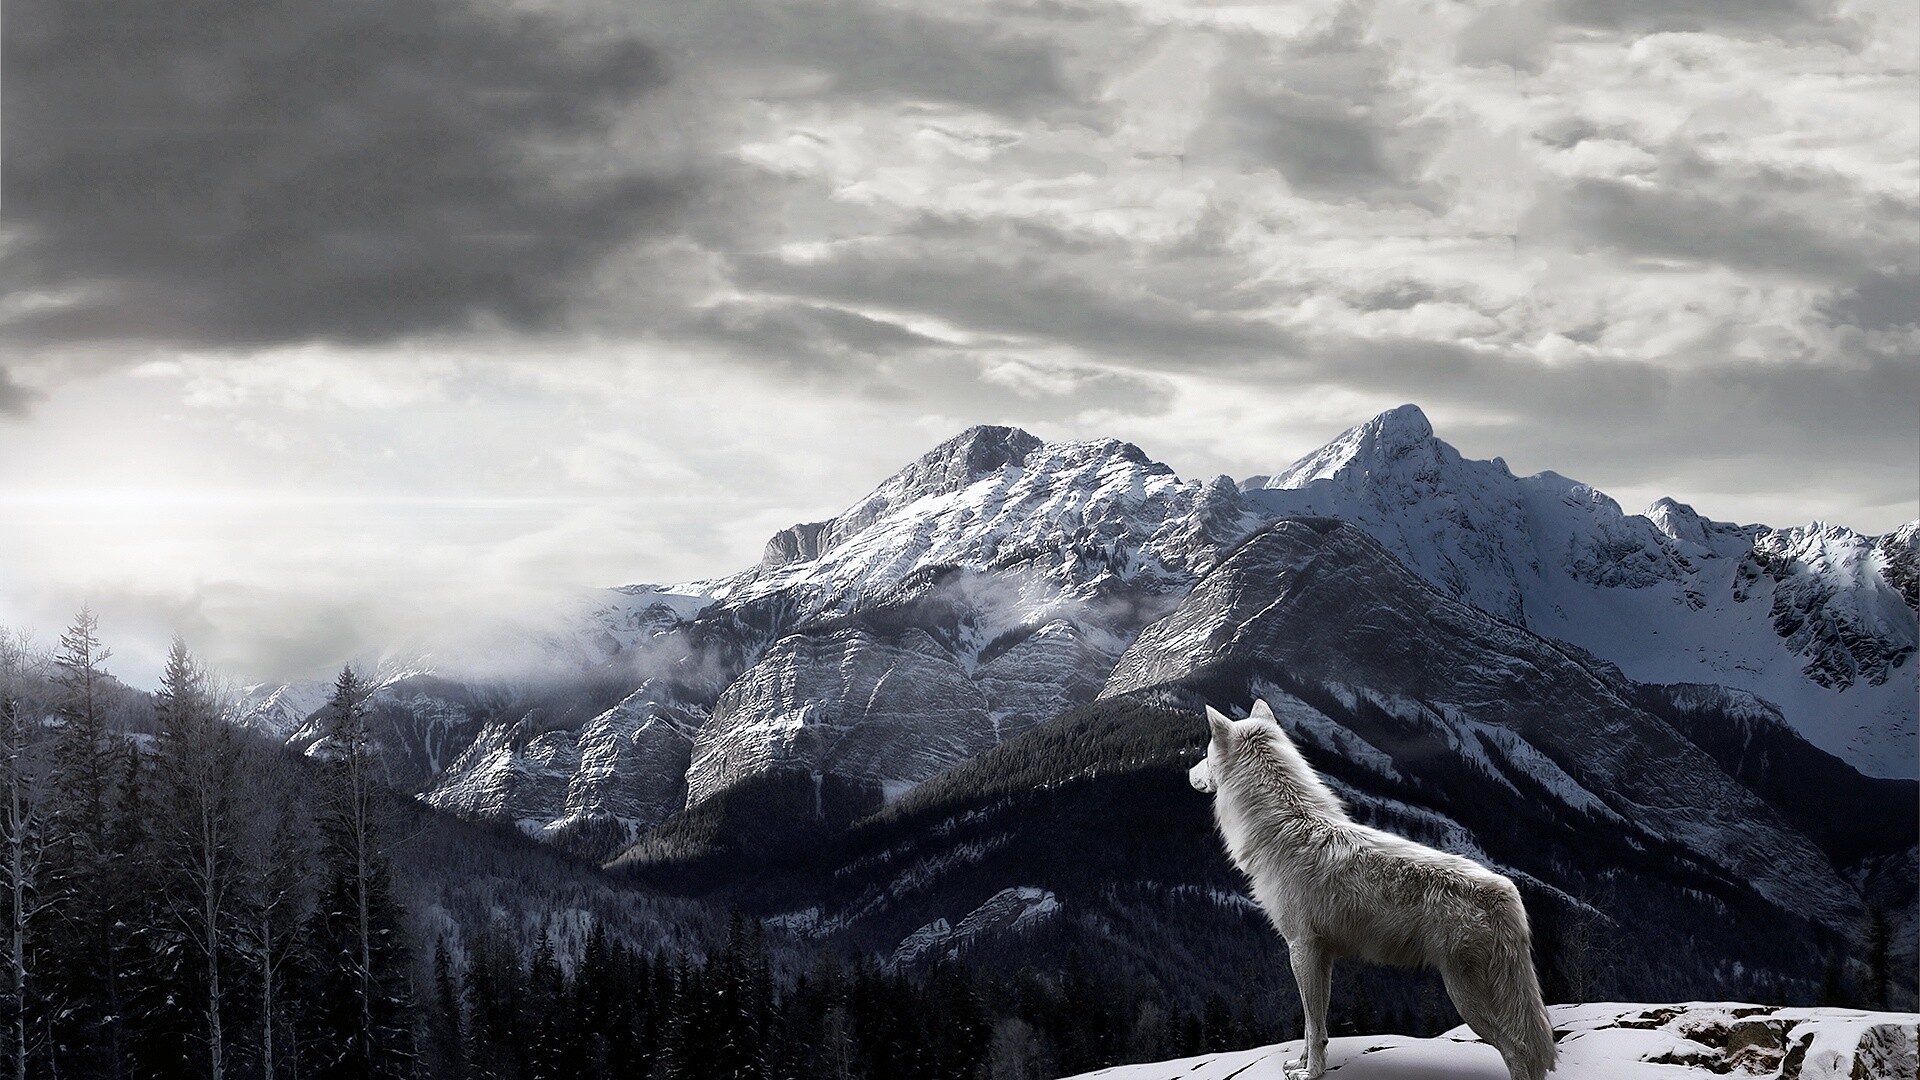 Wolf: Human presence appears to stress wolves, as seen by increased cortisol levels in instances such as snowmobiling near their territory. 1920x1080 Full HD Background.